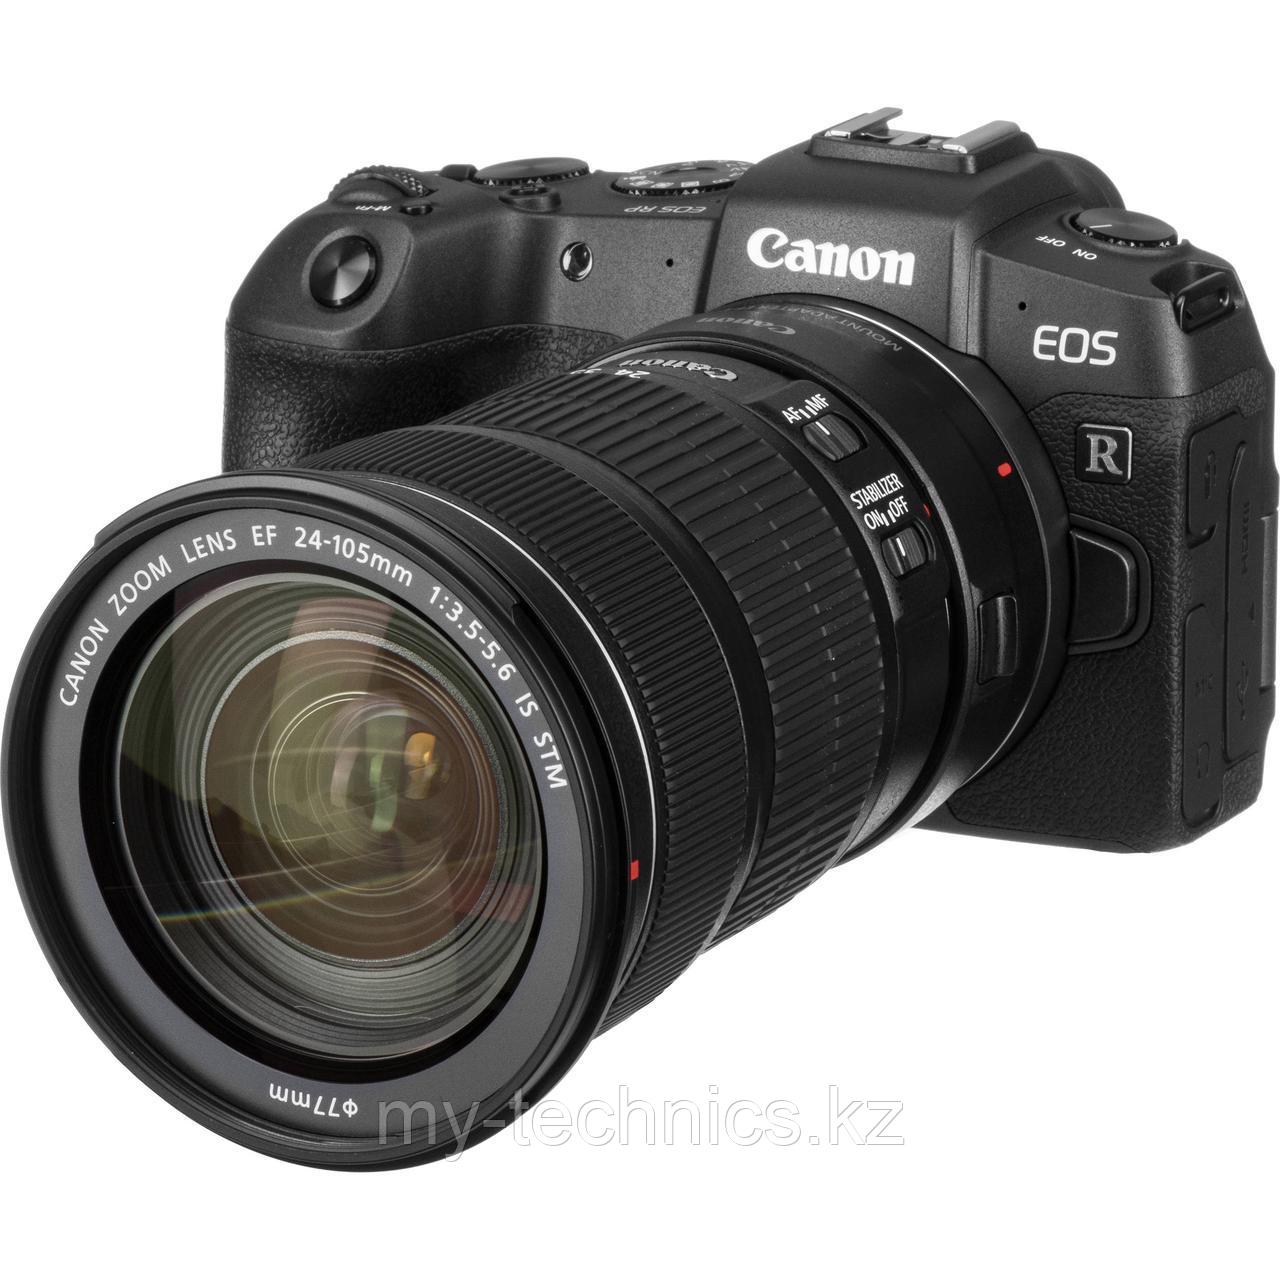 Canon EOS RP kit EF 24-105mm f/3.5-5.6 STM + Mount Adapter EF-EOS R